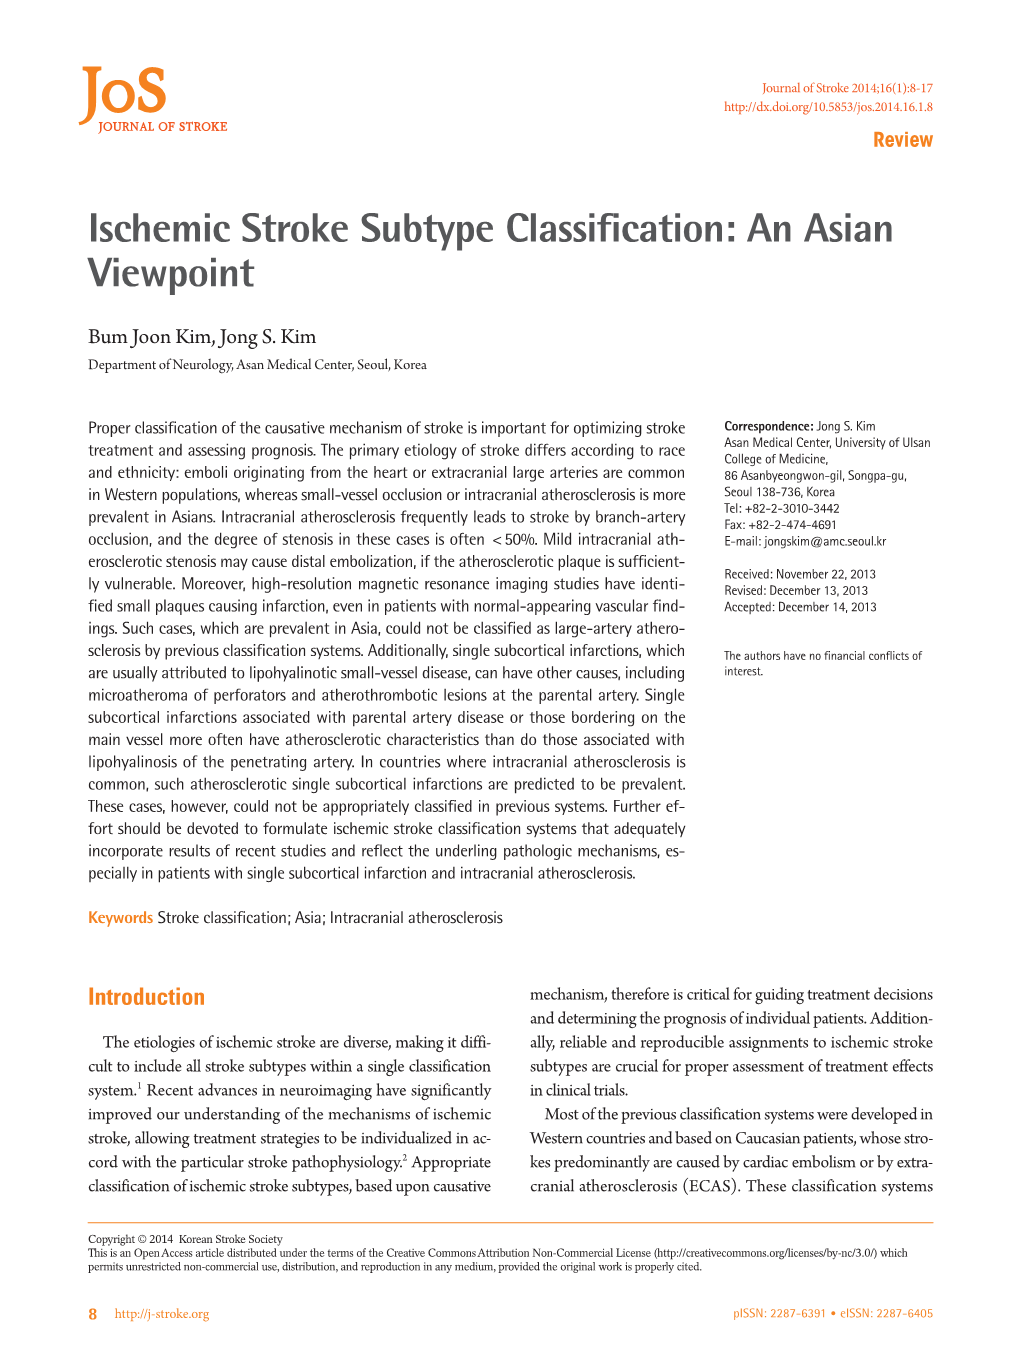 Ischemic Stroke Subtype Classification: an Asian Viewpoint